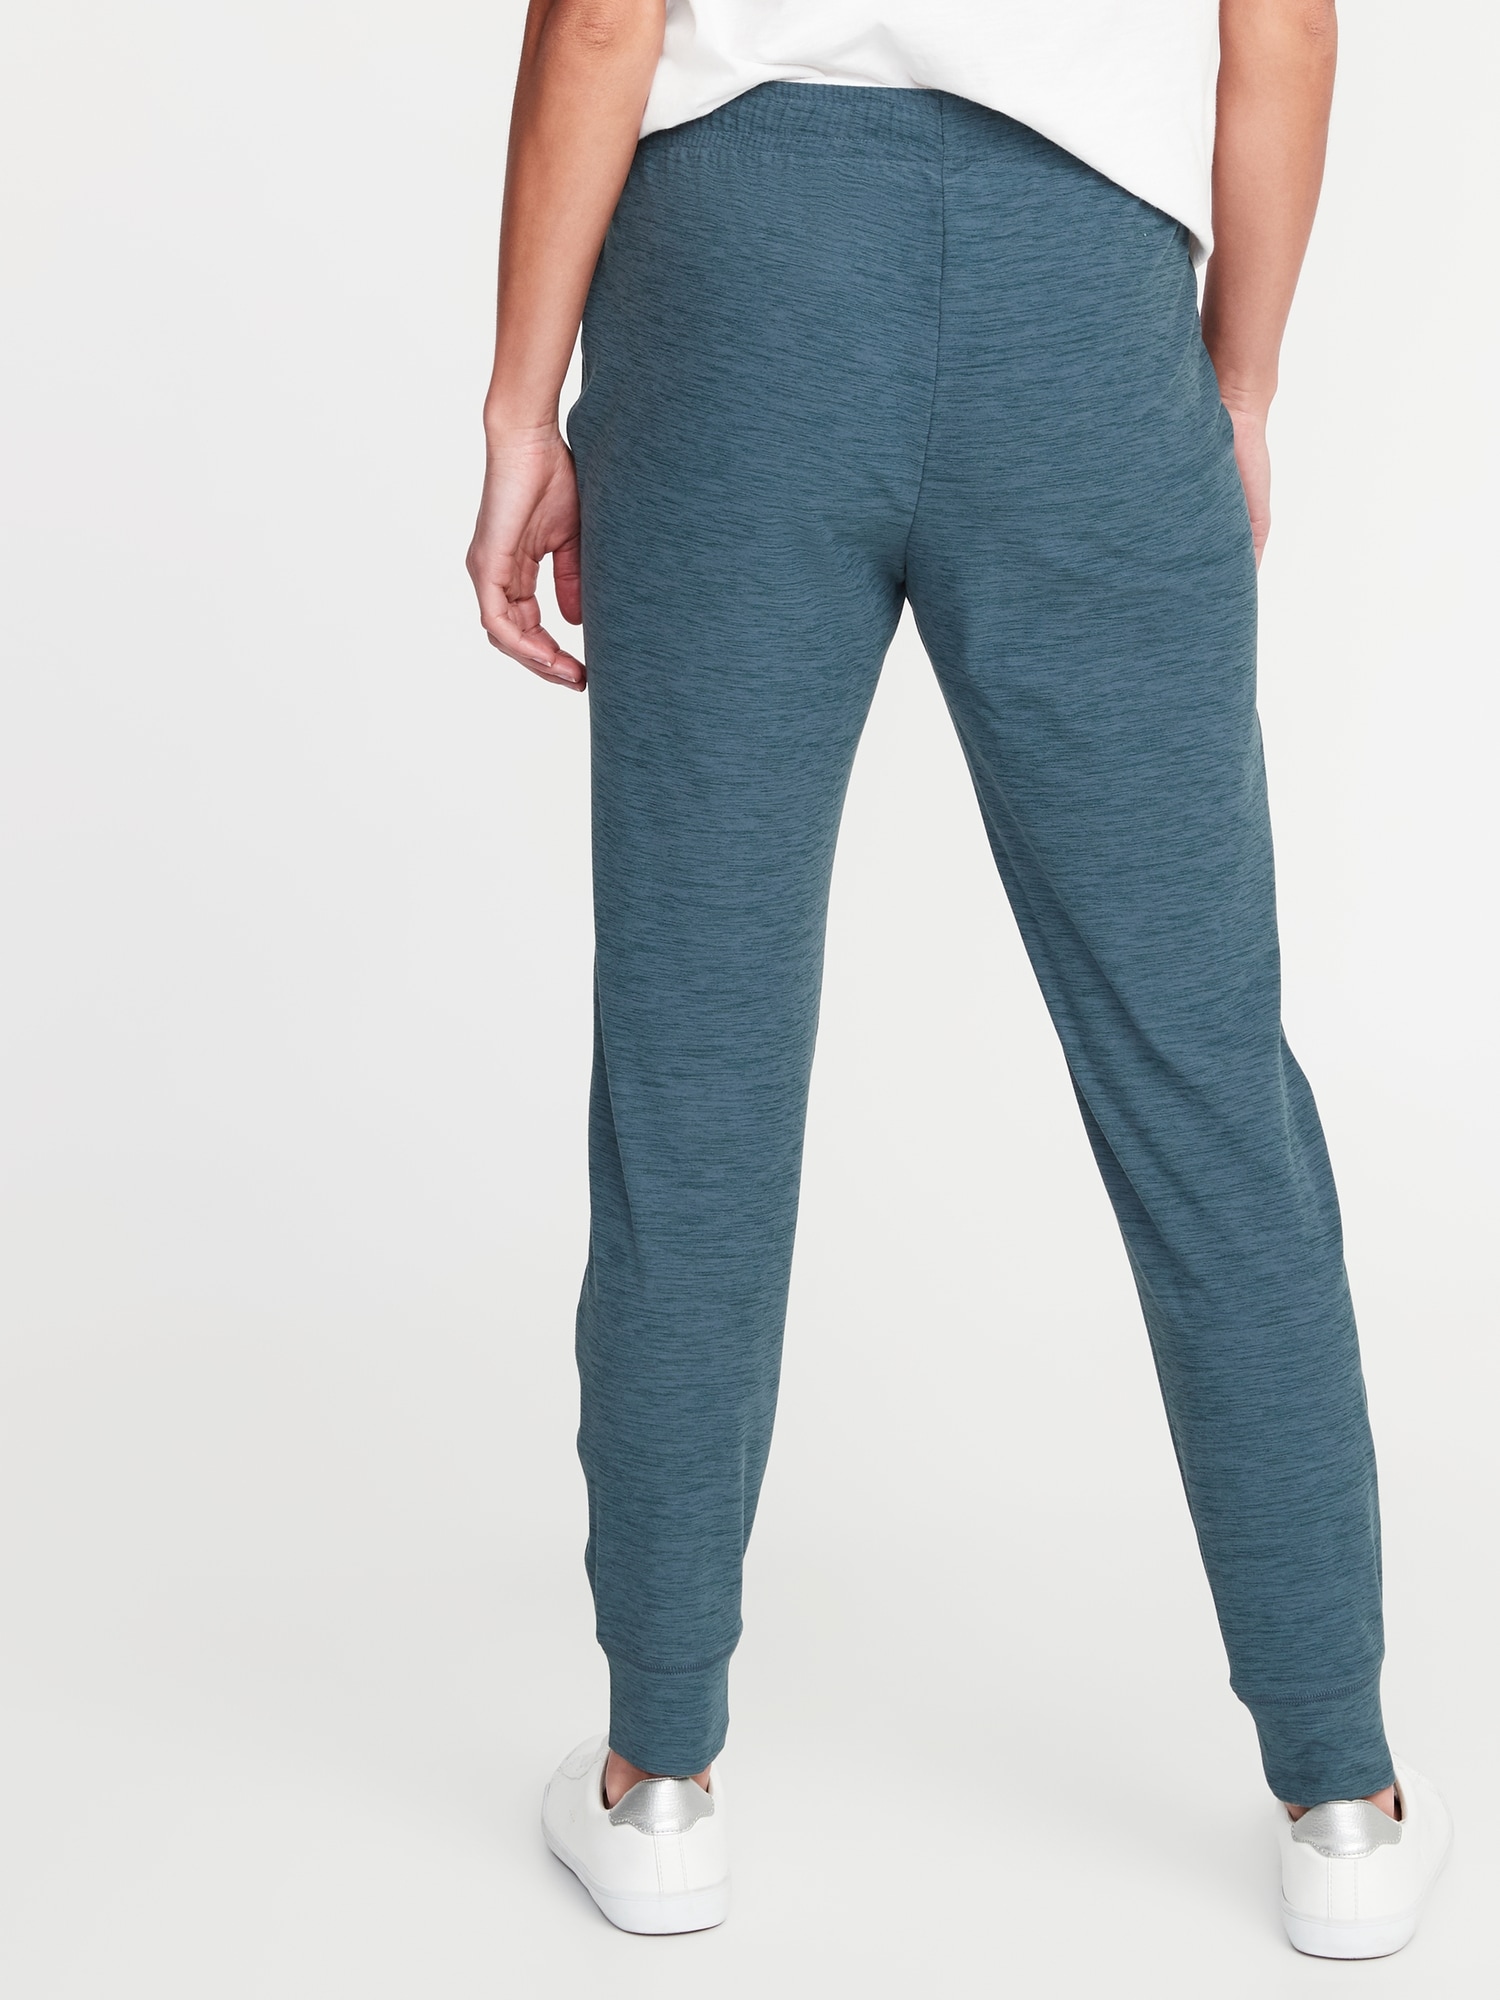 old navy jean joggers